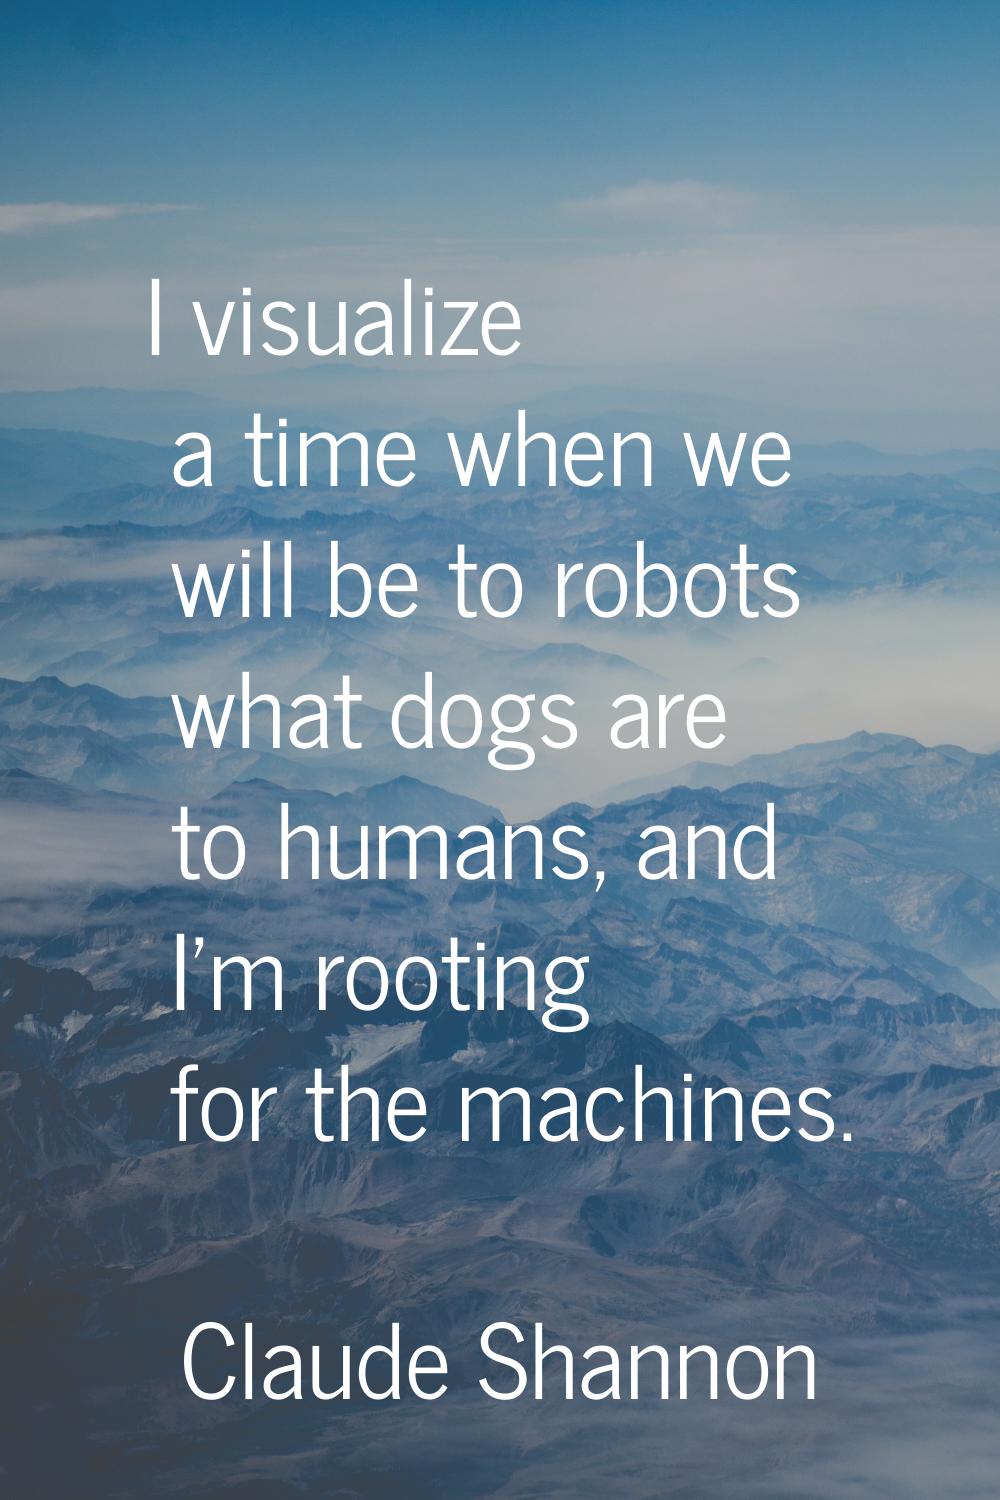 I visualize a time when we will be to robots what dogs are to humans, and I'm rooting for the machi